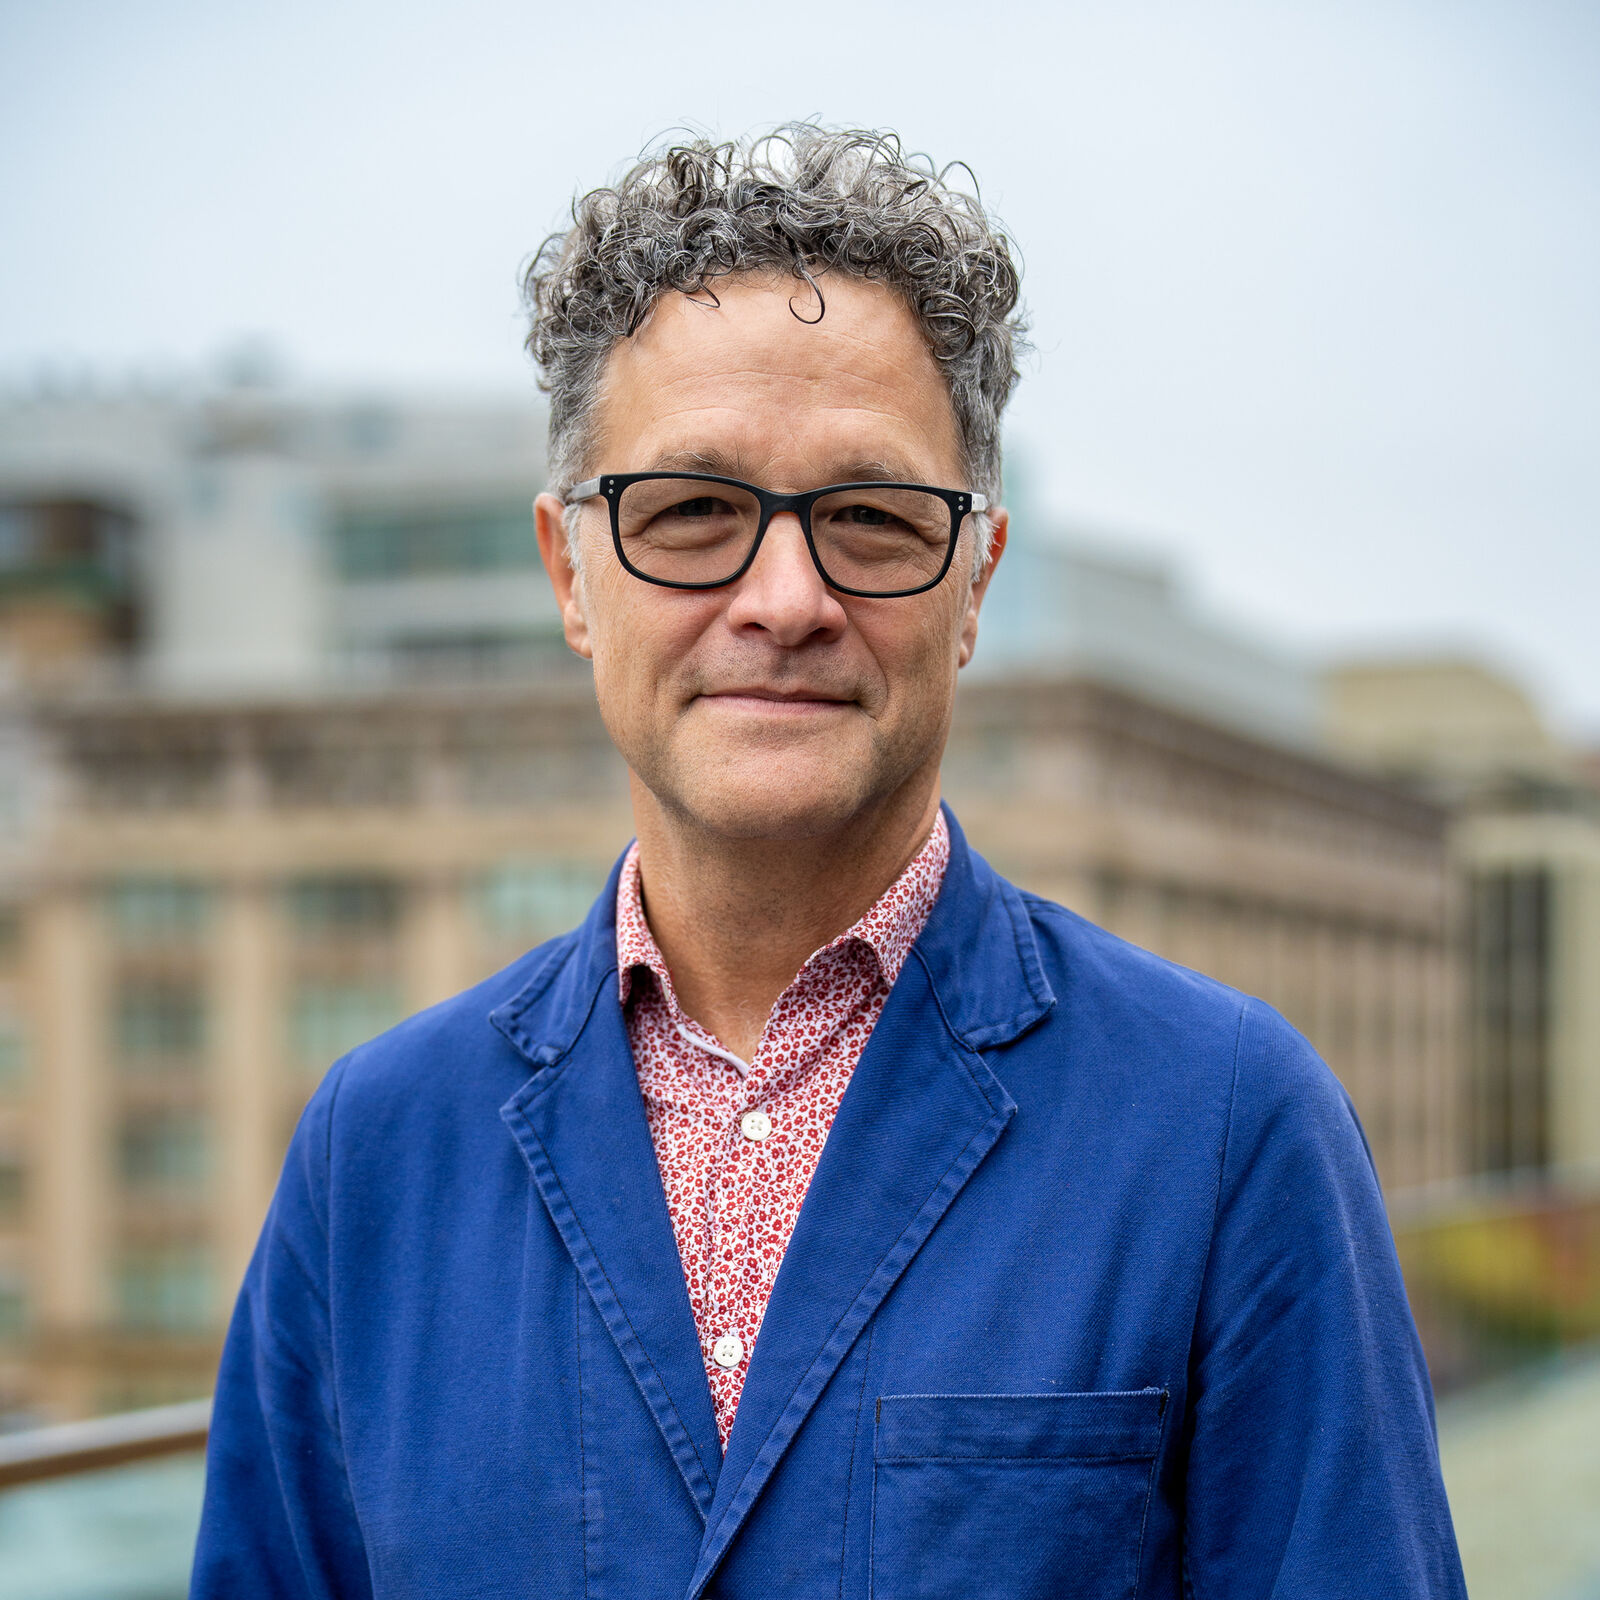 A man smiles at the camera, his lips pressed into a flat smile showing mirth at the corners. He wears large black-rimmed glasses with frames shaped like softened rectangles. His short hair curls atop his head in a mix of silver and dark gray. He wears a blue jacket with a red and white shirt with such a small pattern it appears to be pink. A cityscape in beige and gray is behind him.